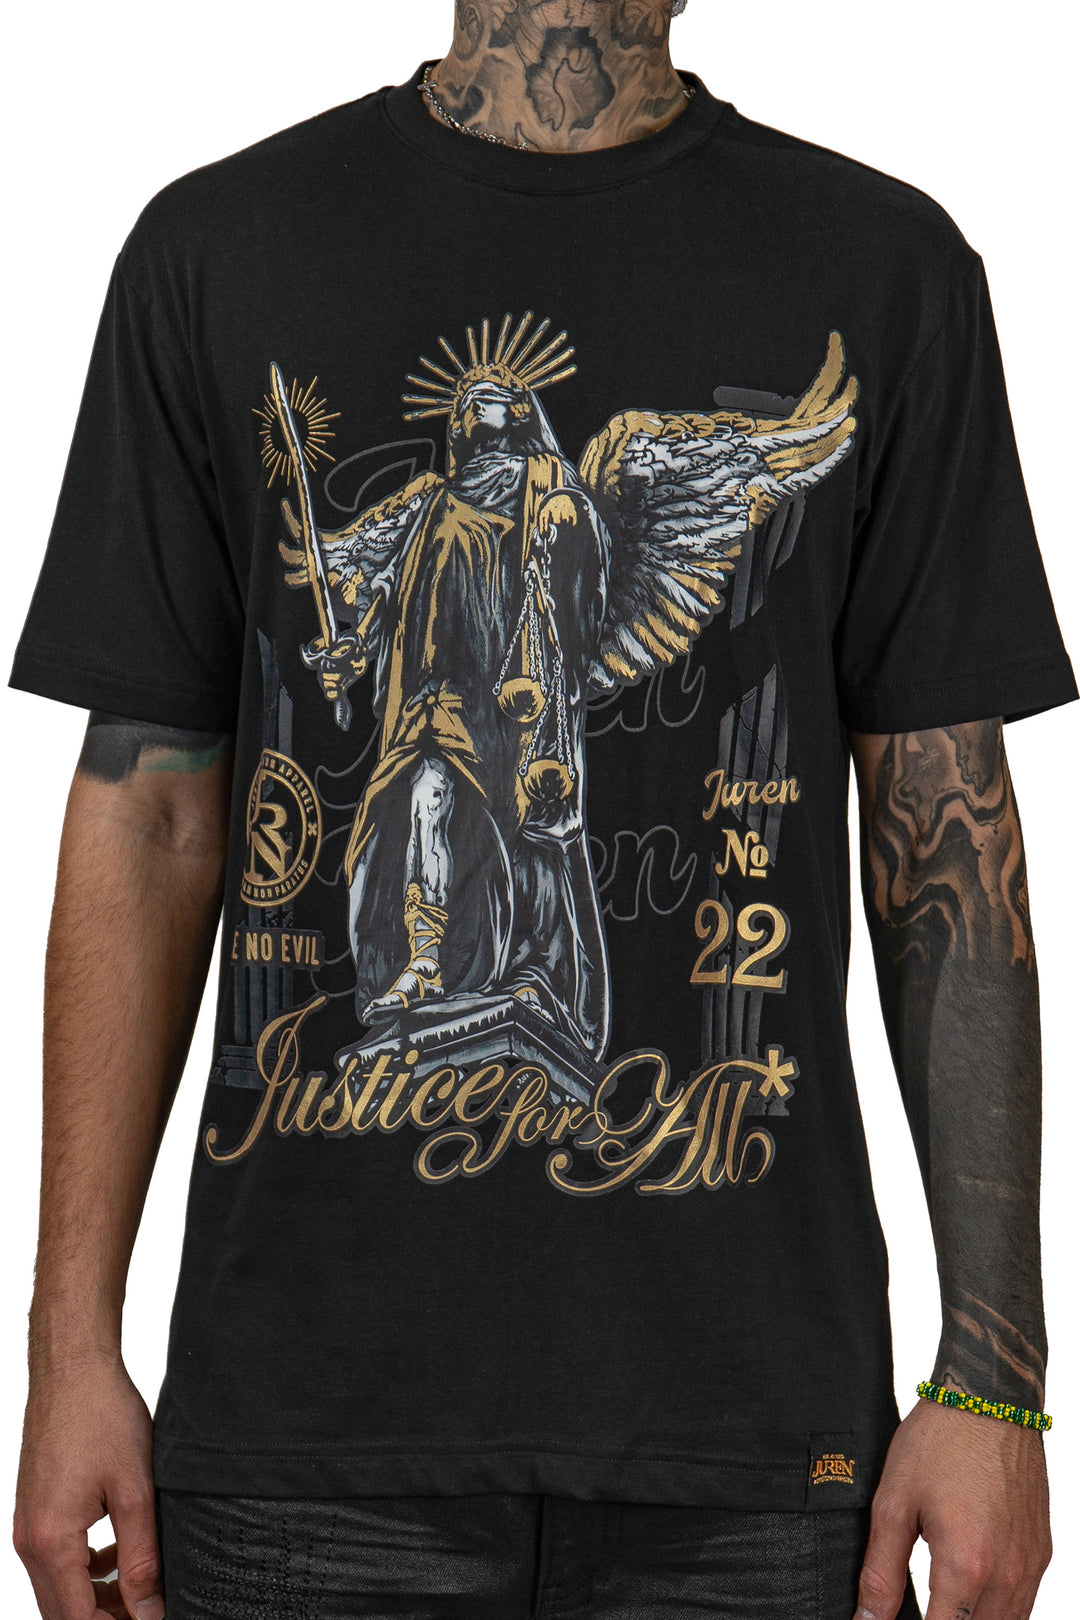 Justice For All Tee